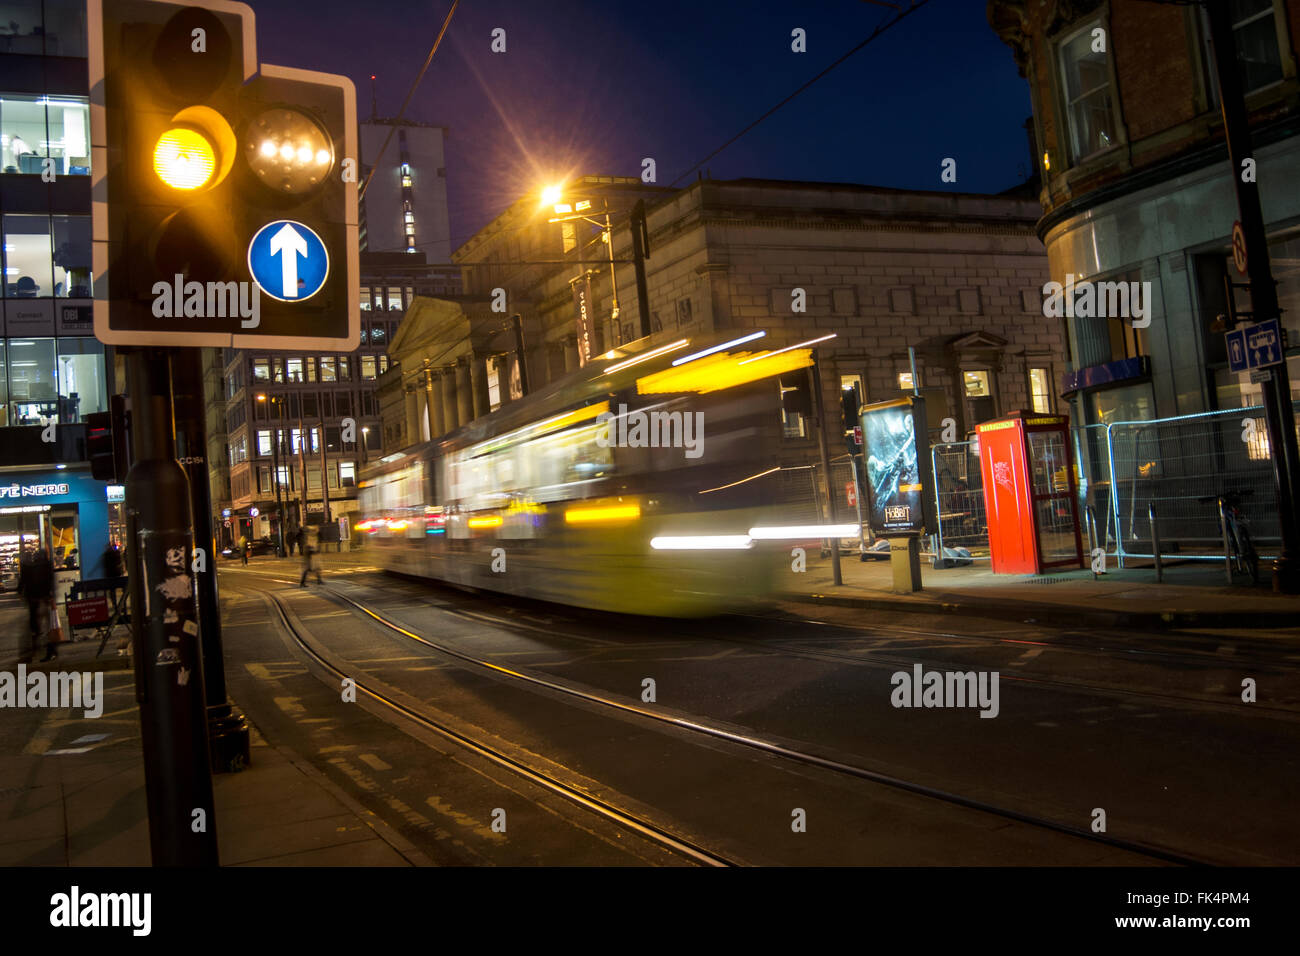 Metrolink tram entering St. Peters Square in Manchester in the evening. Stock Photo